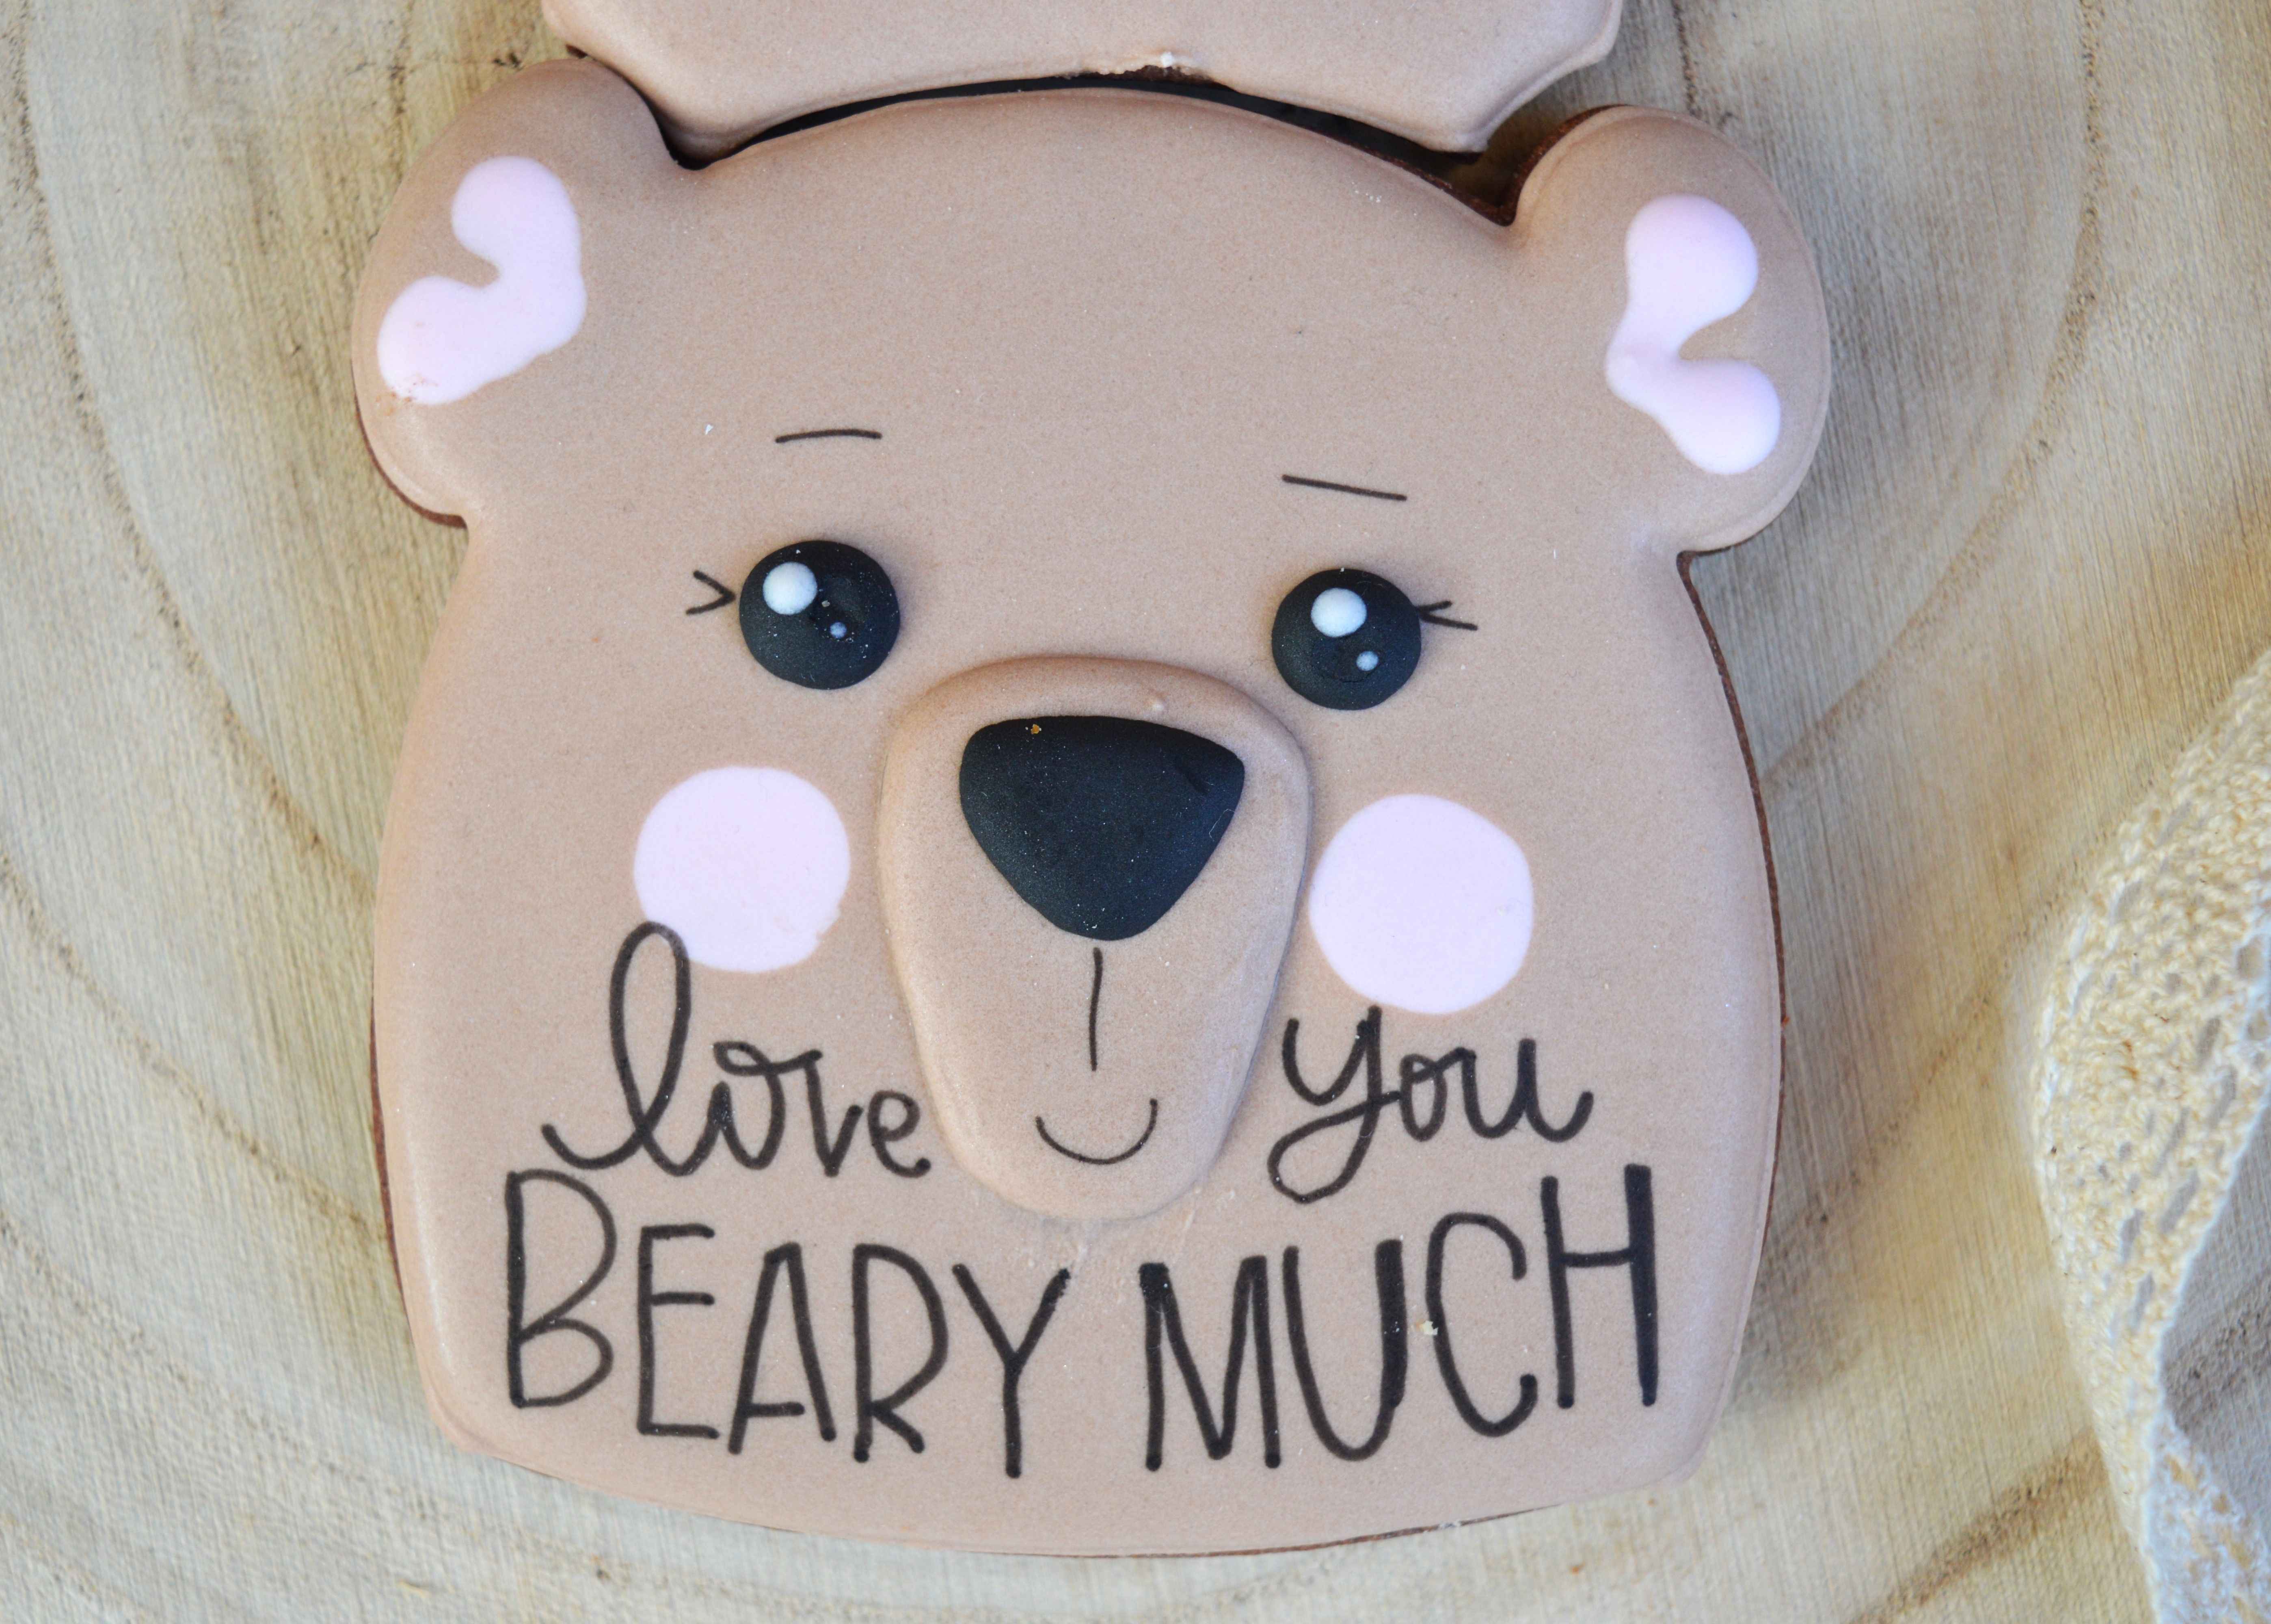 Love you beary much-Mother's Day-Mother's Day Gift-Birthday Gift-Anniversary gift-Thank you gift-Custom made-Cookies-Biscuits-Party Favor